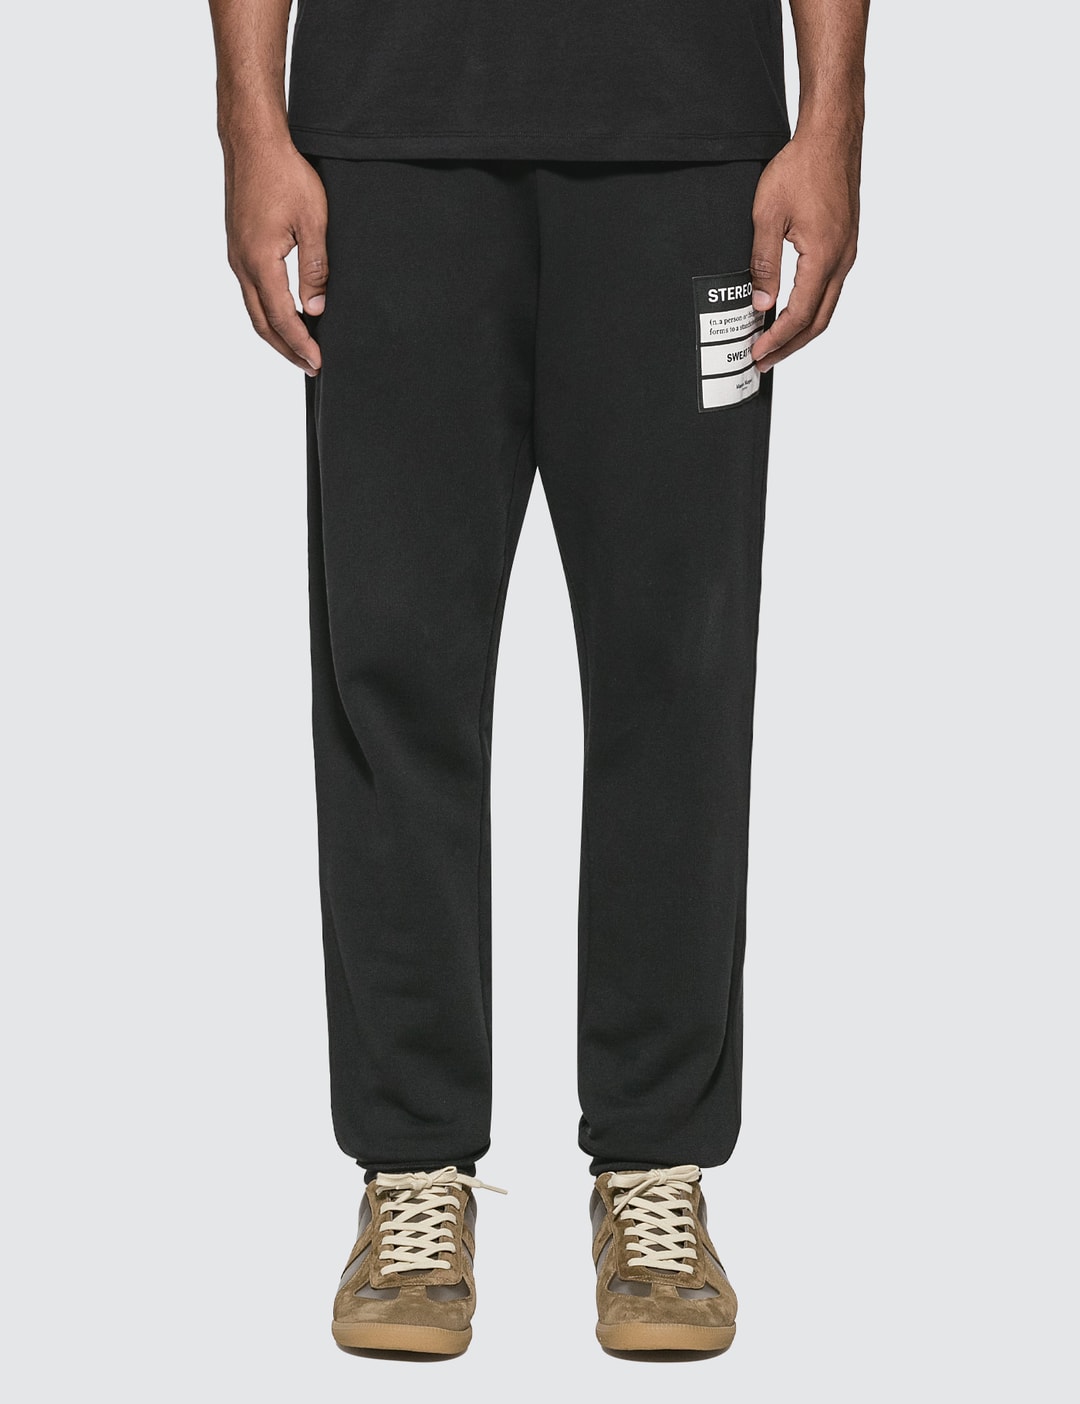 Maison Margiela - Stereotype Jogger Pants | HBX - Globally Curated ...